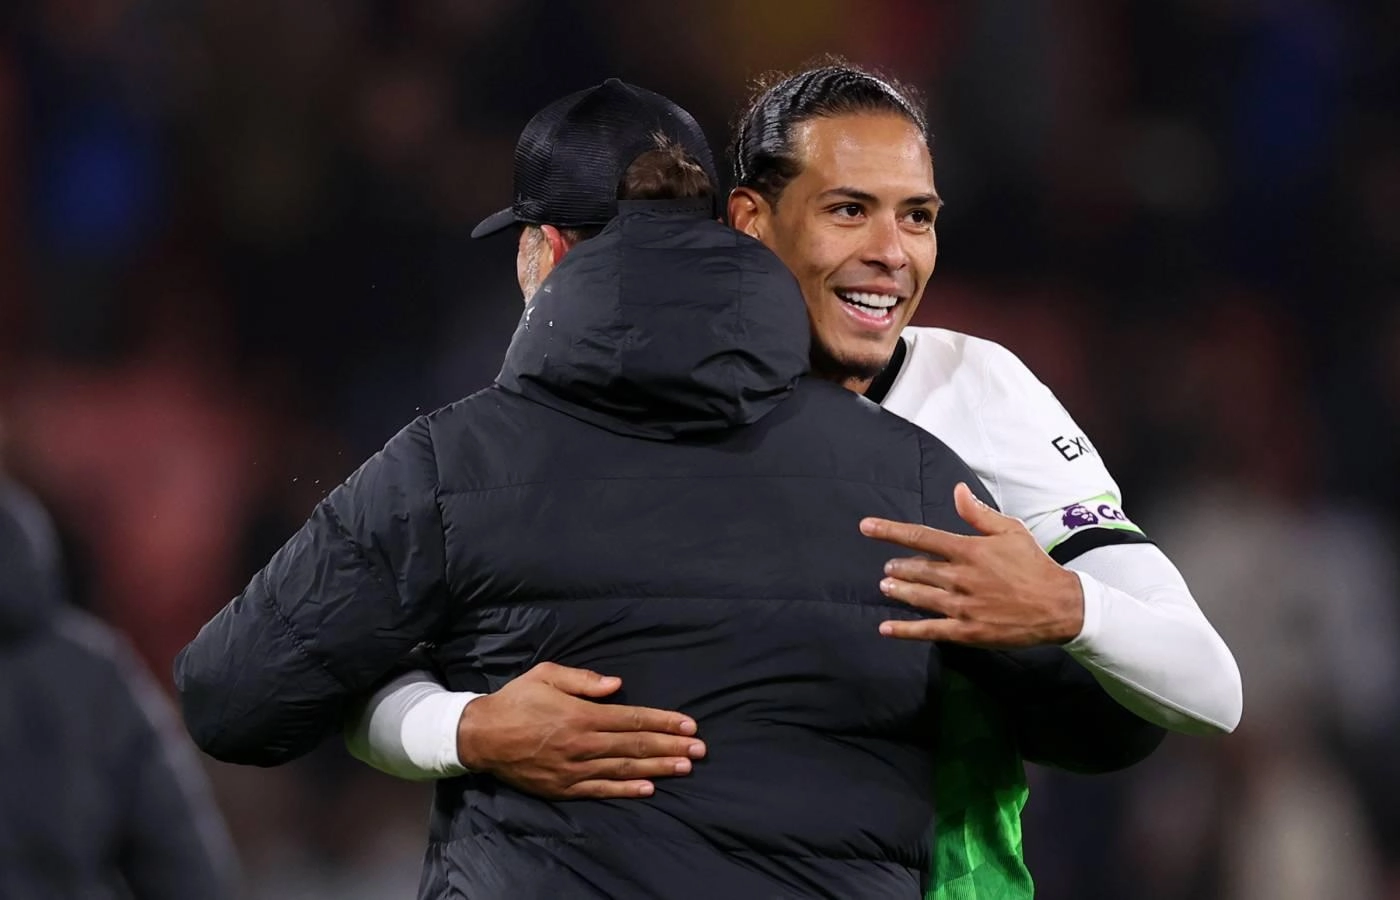 "The only thing that matters now" -- Virgil van Dijk on Klopp's exit